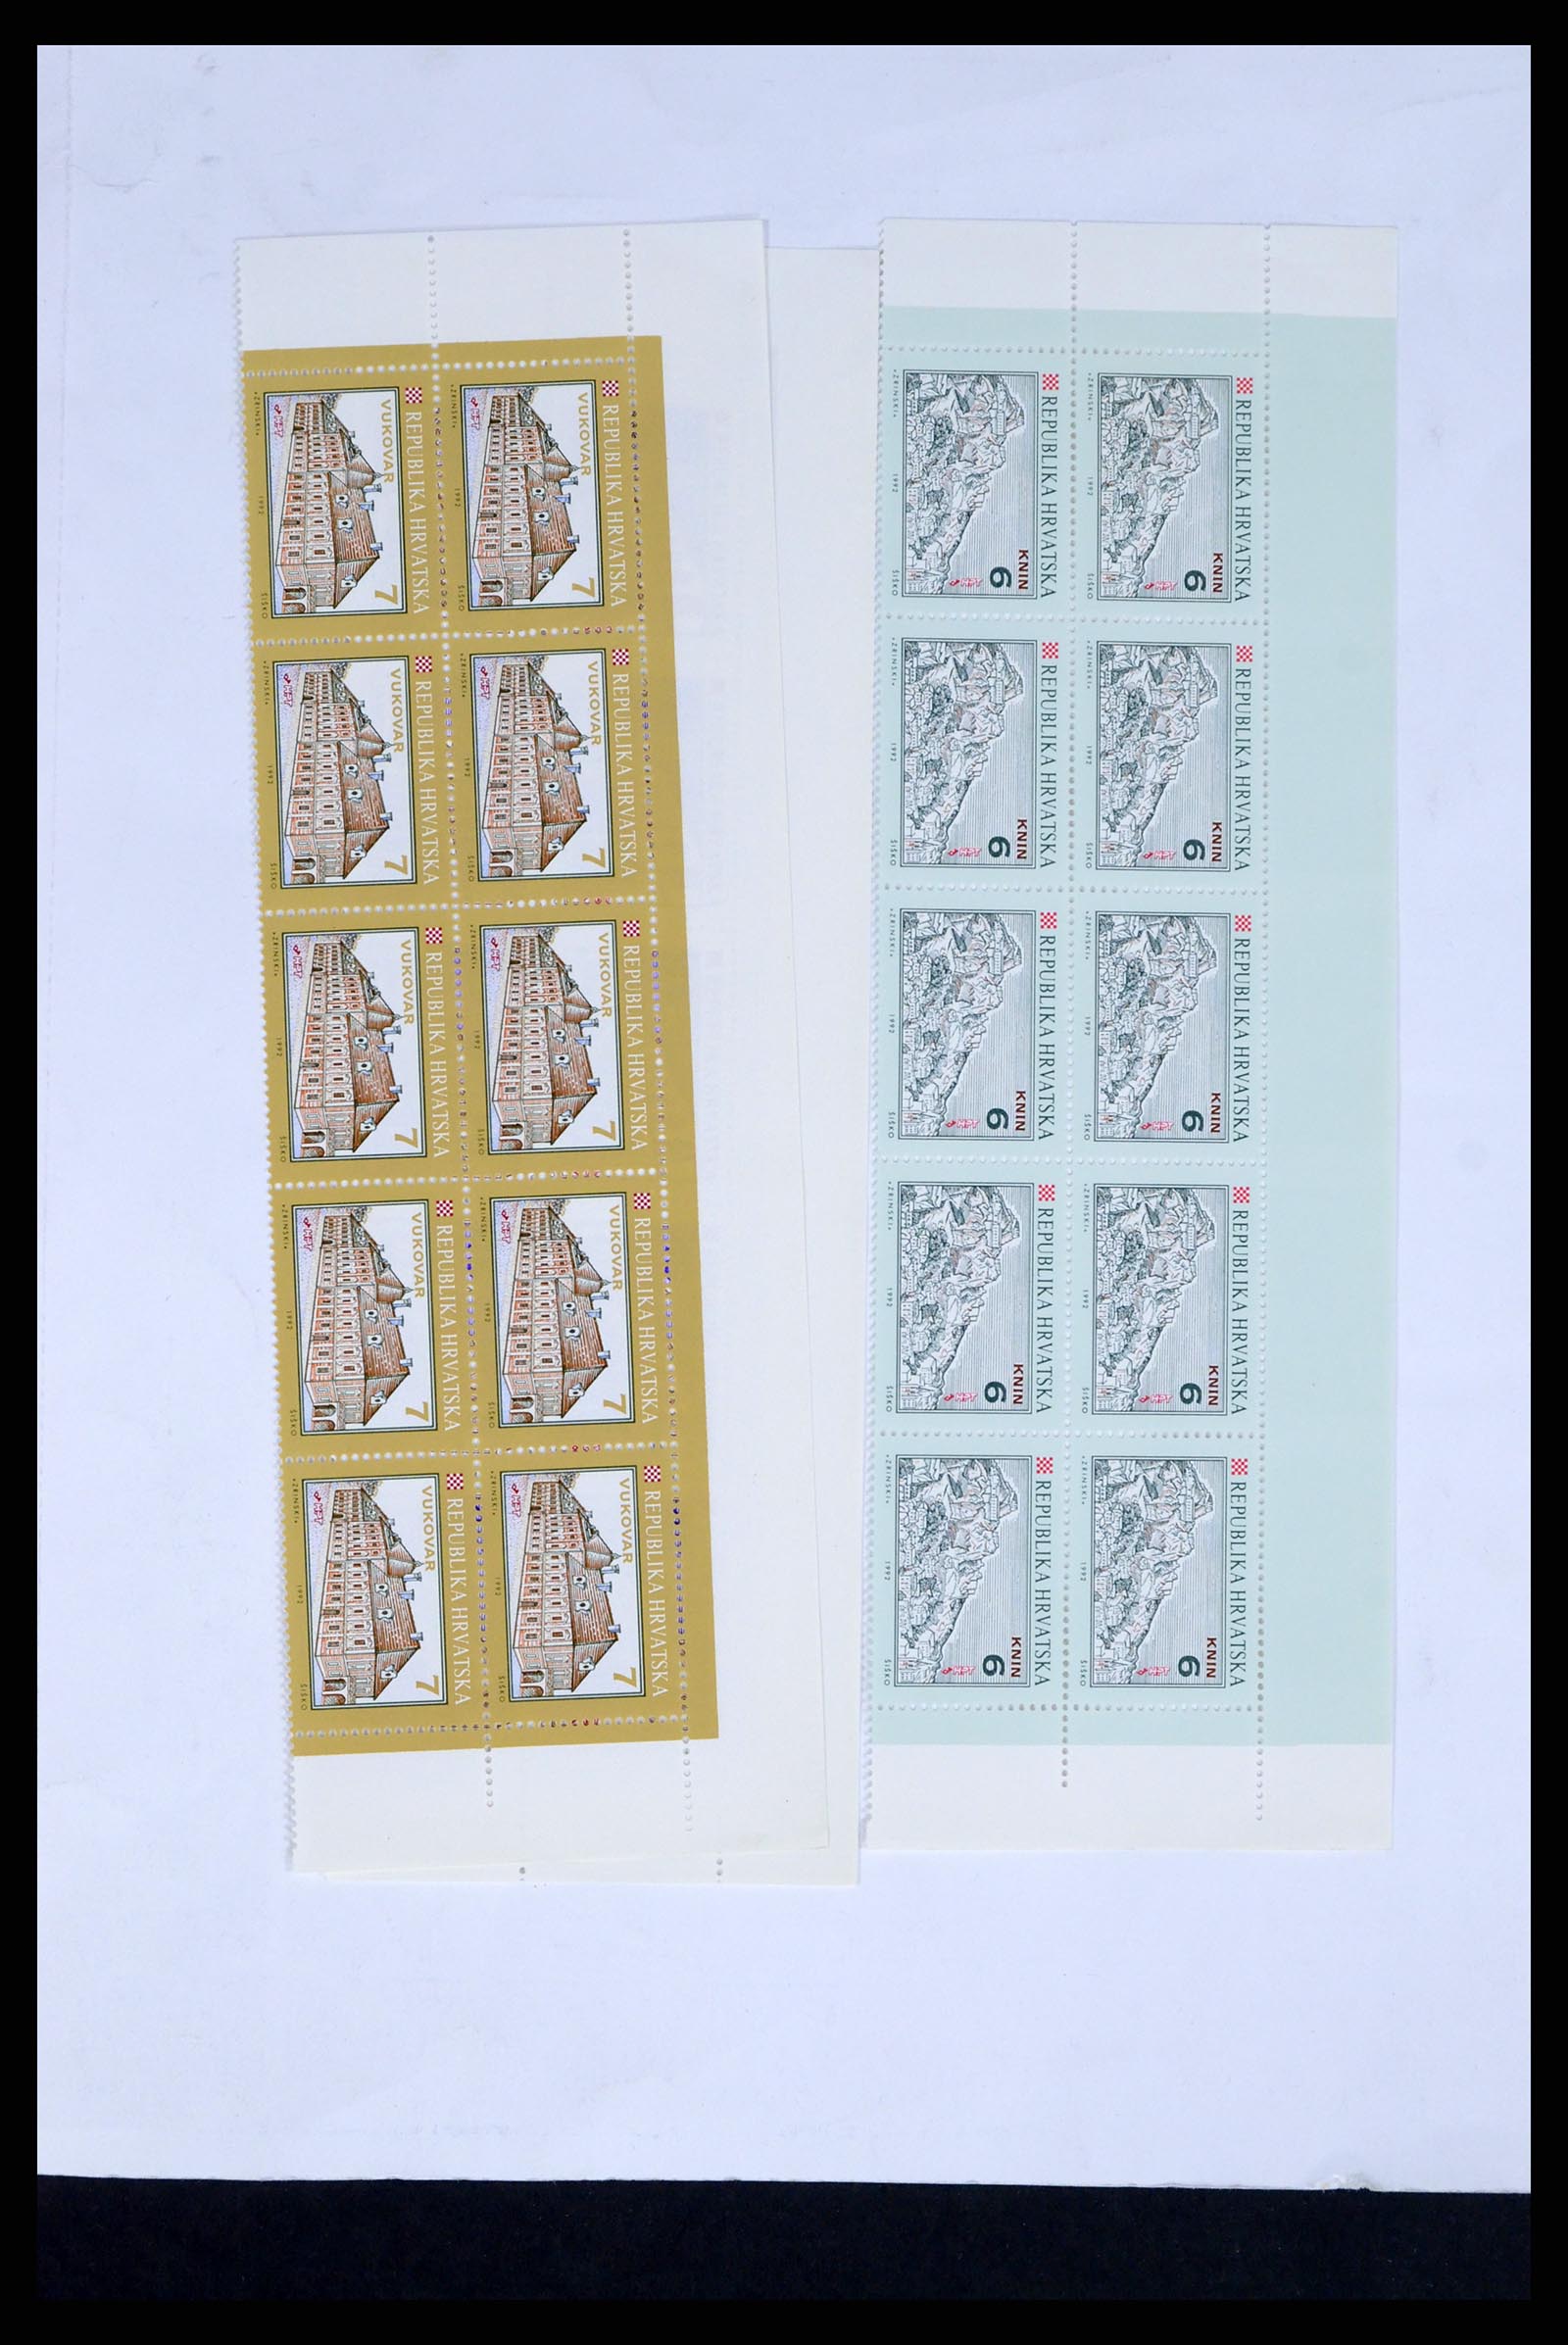 37351 024 - Stamp collection 37351 European countries MNH 1990-2000.